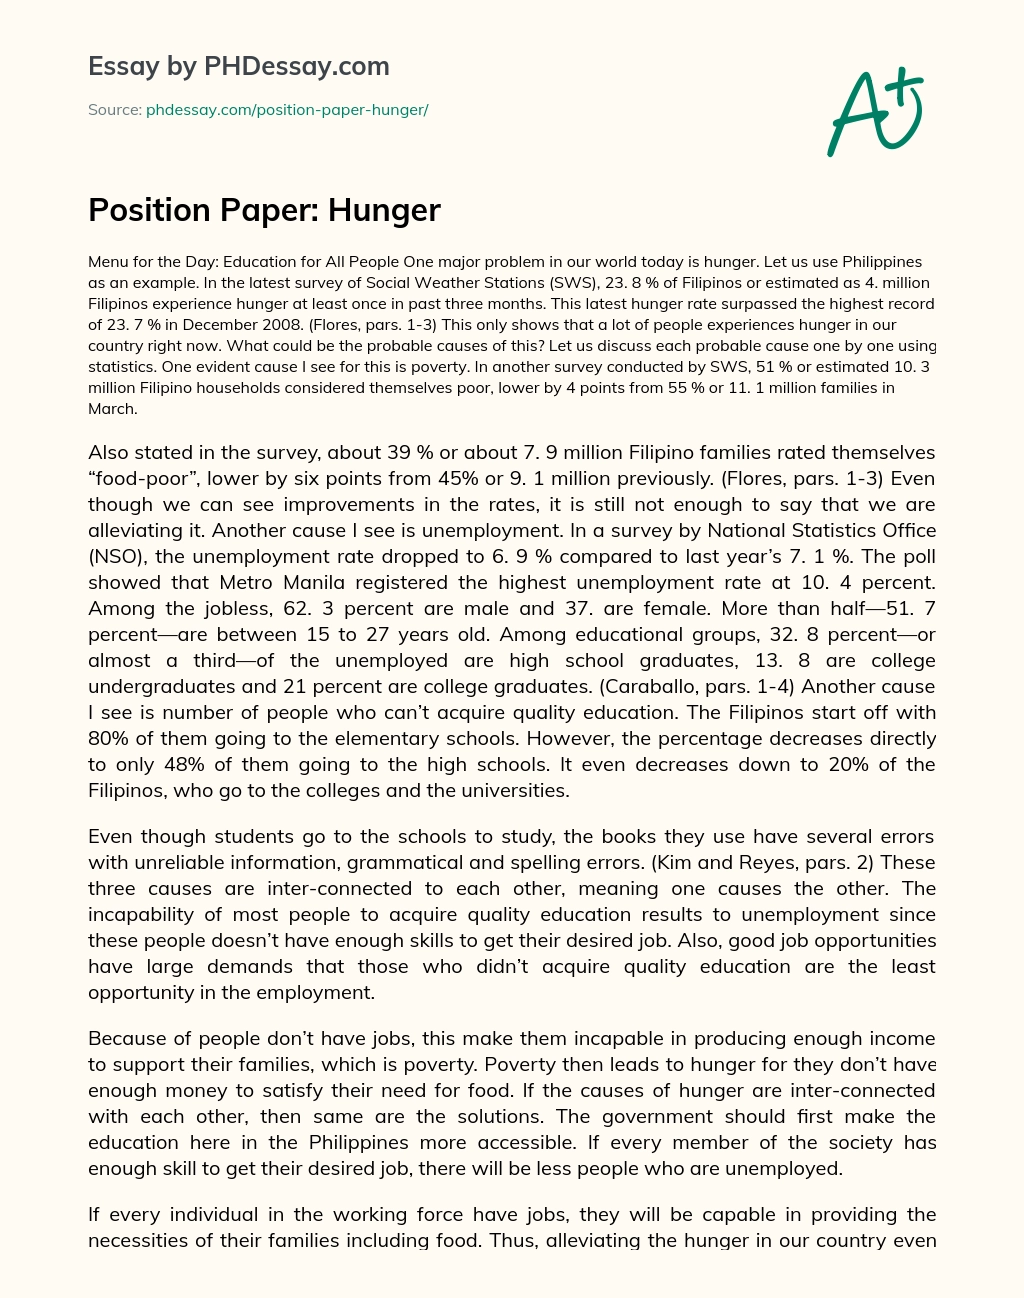 research paper about poverty and hunger